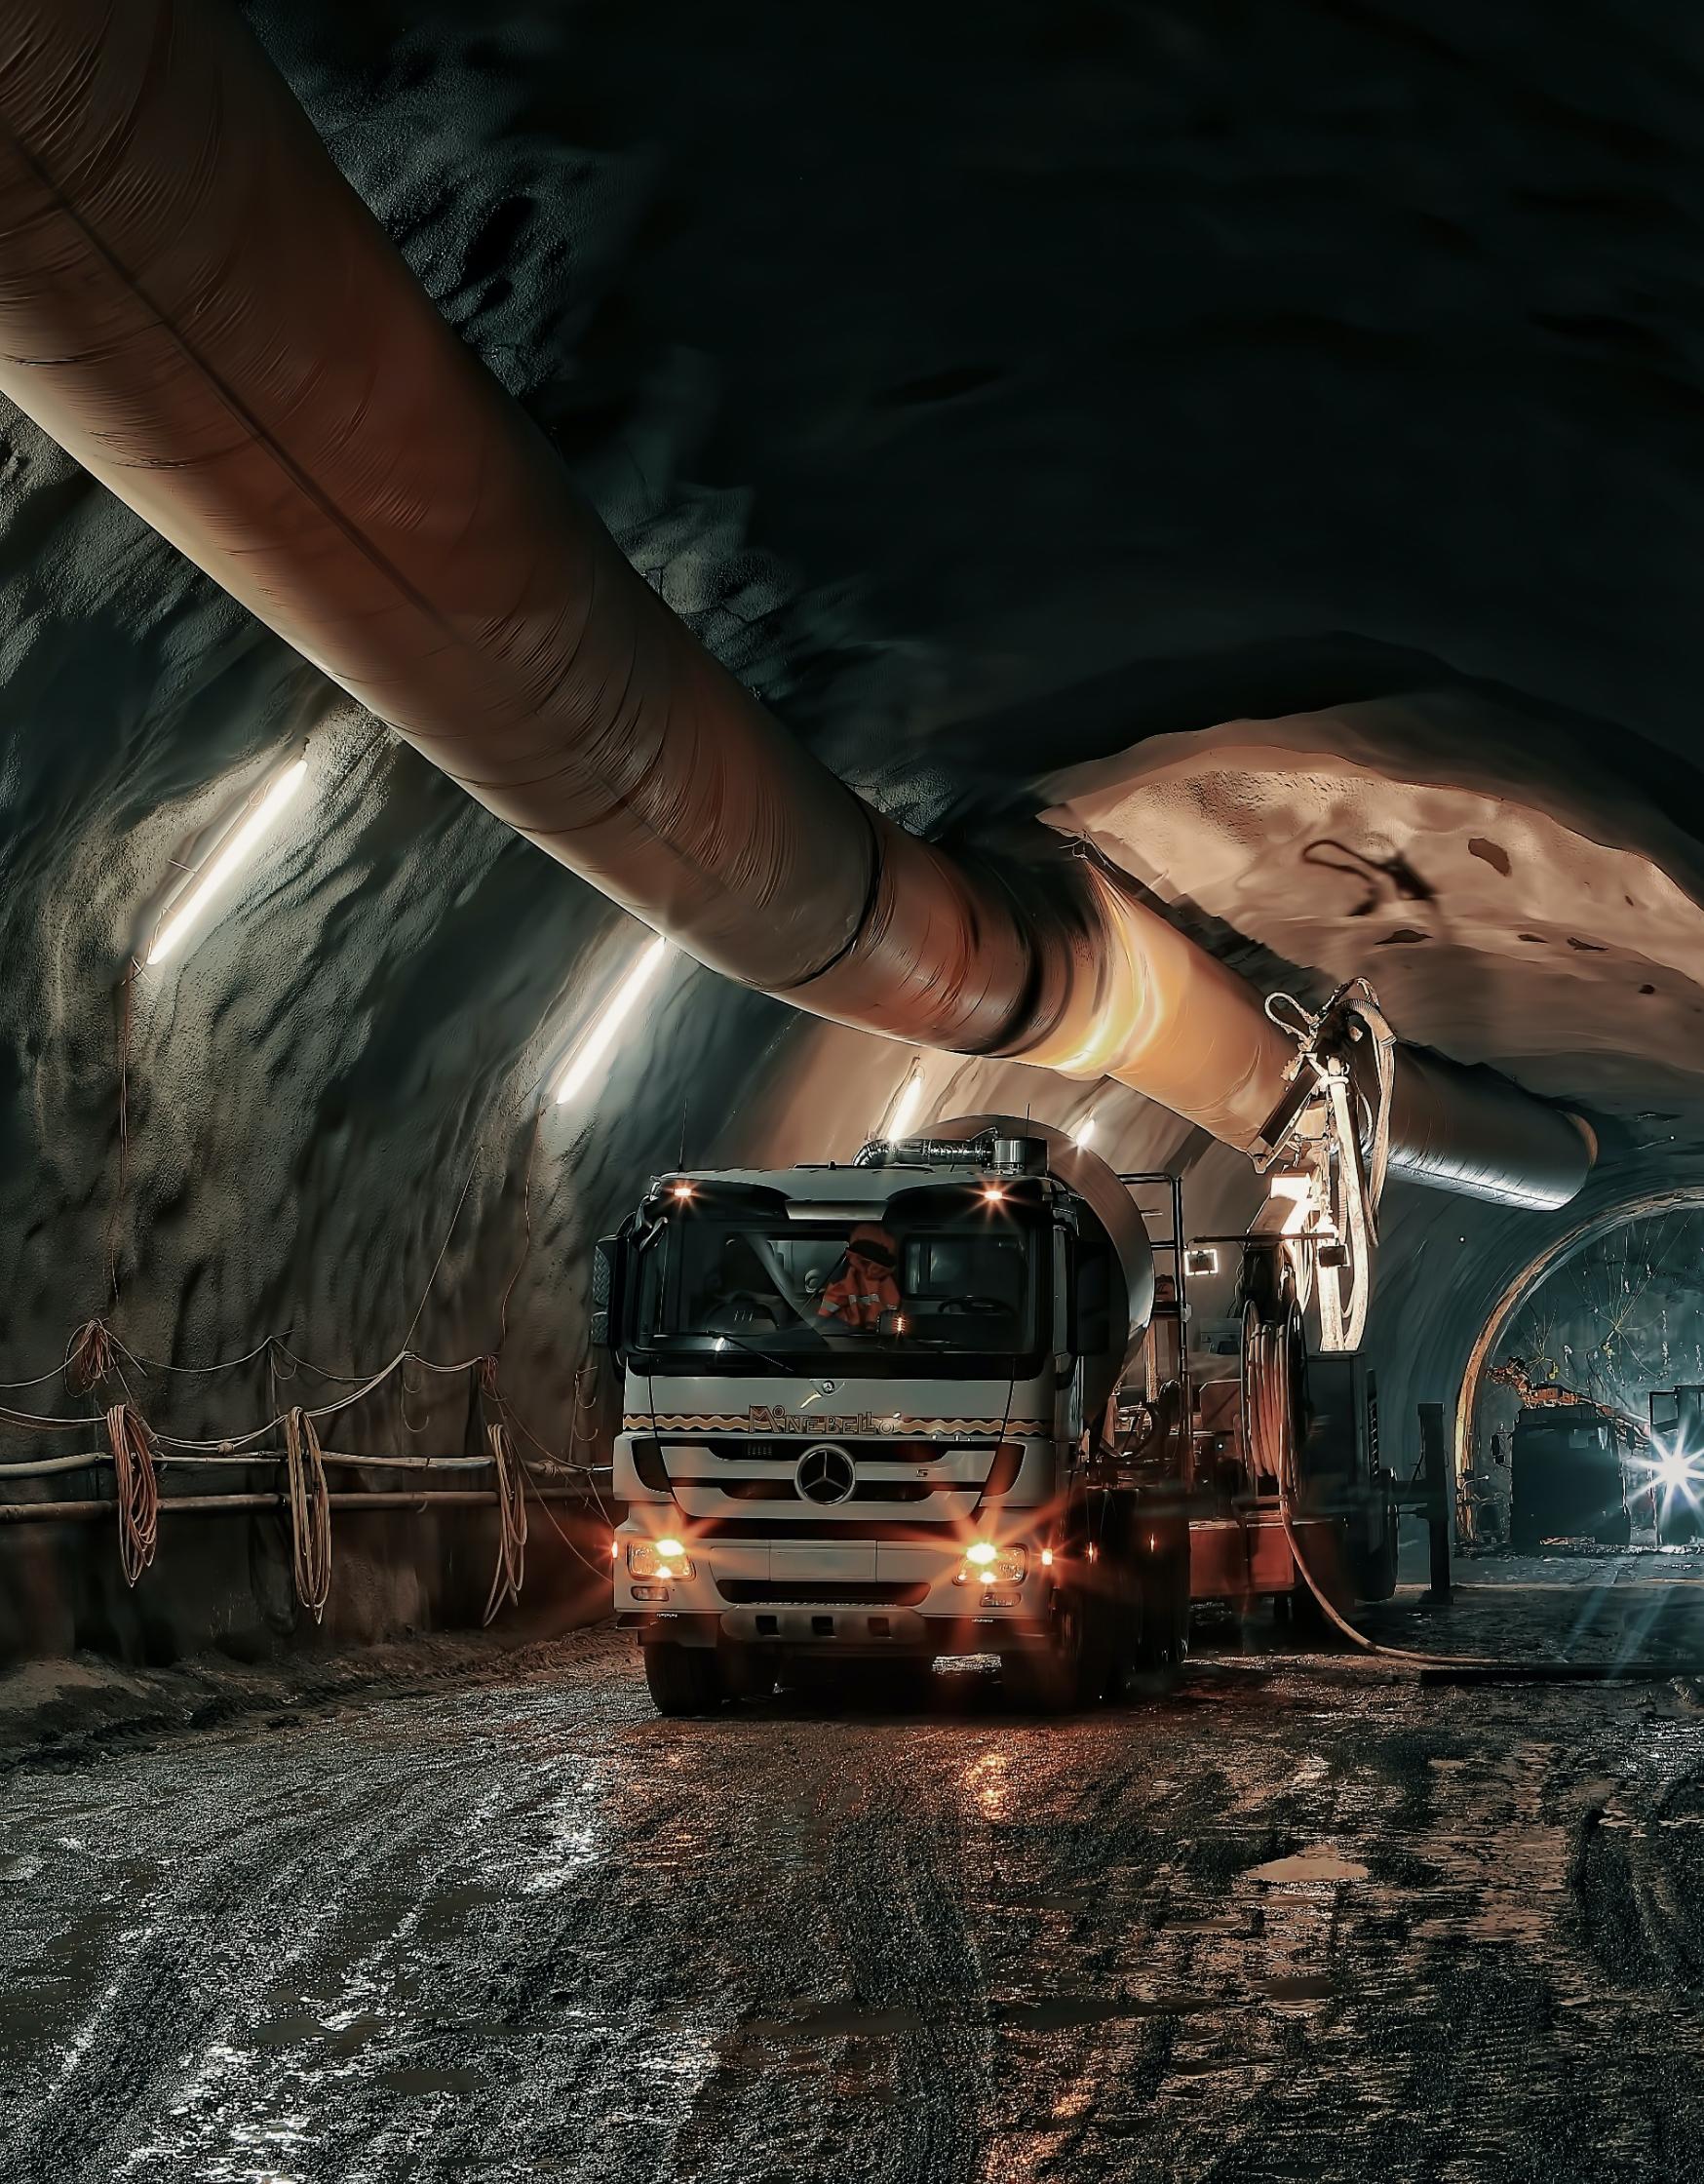 A truck parked in a mine with pipe running overhead.